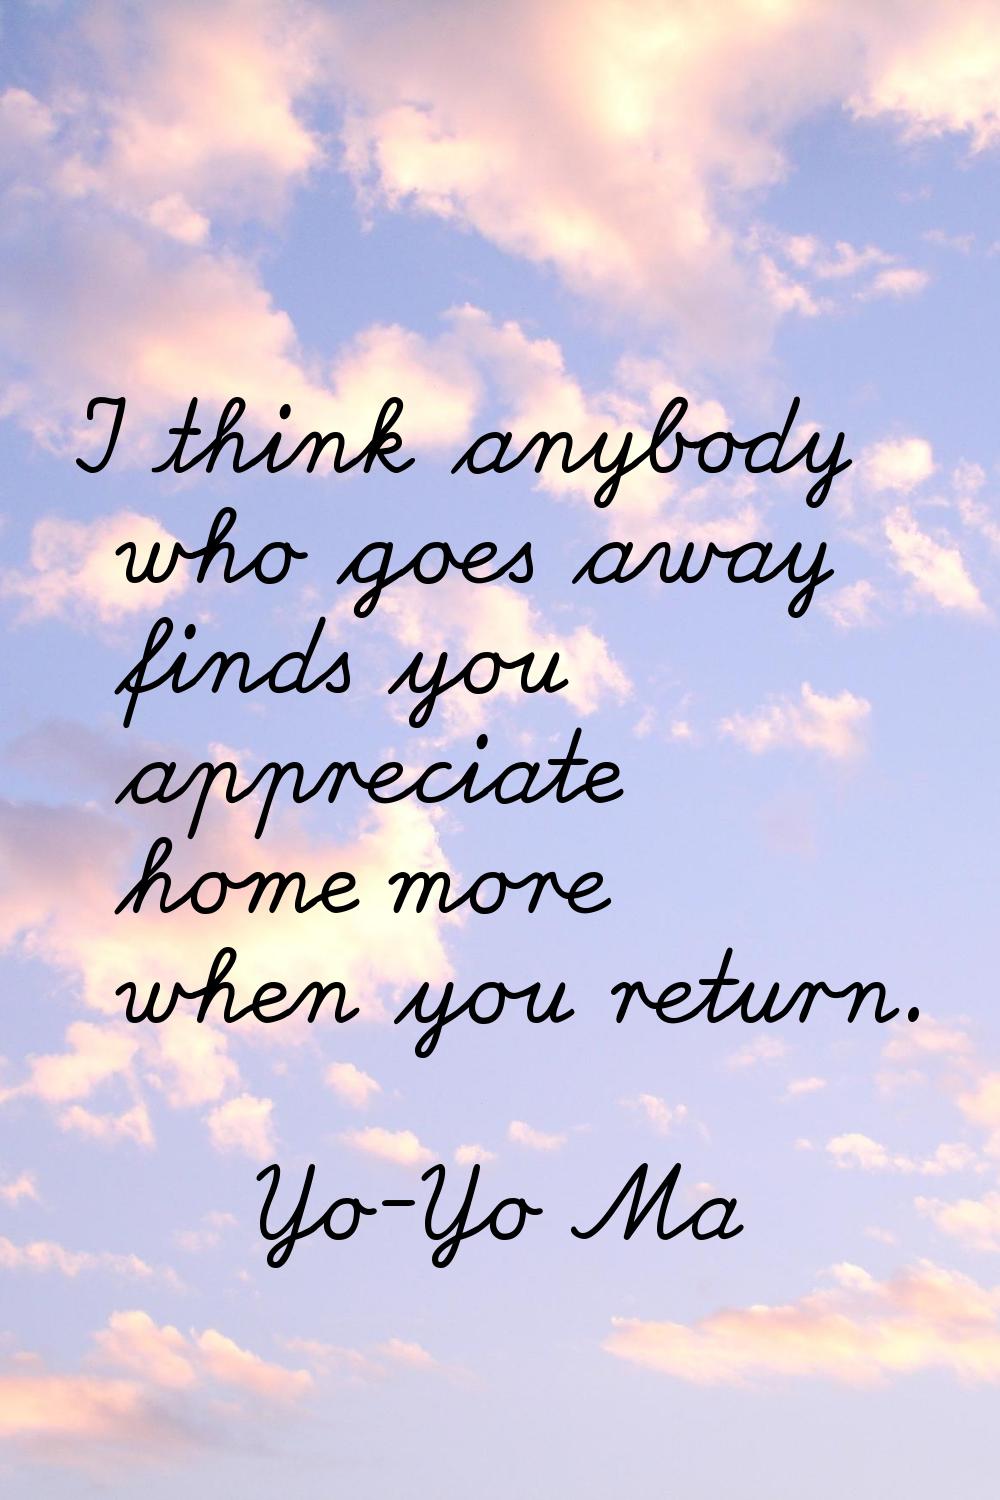 I think anybody who goes away finds you appreciate home more when you return.